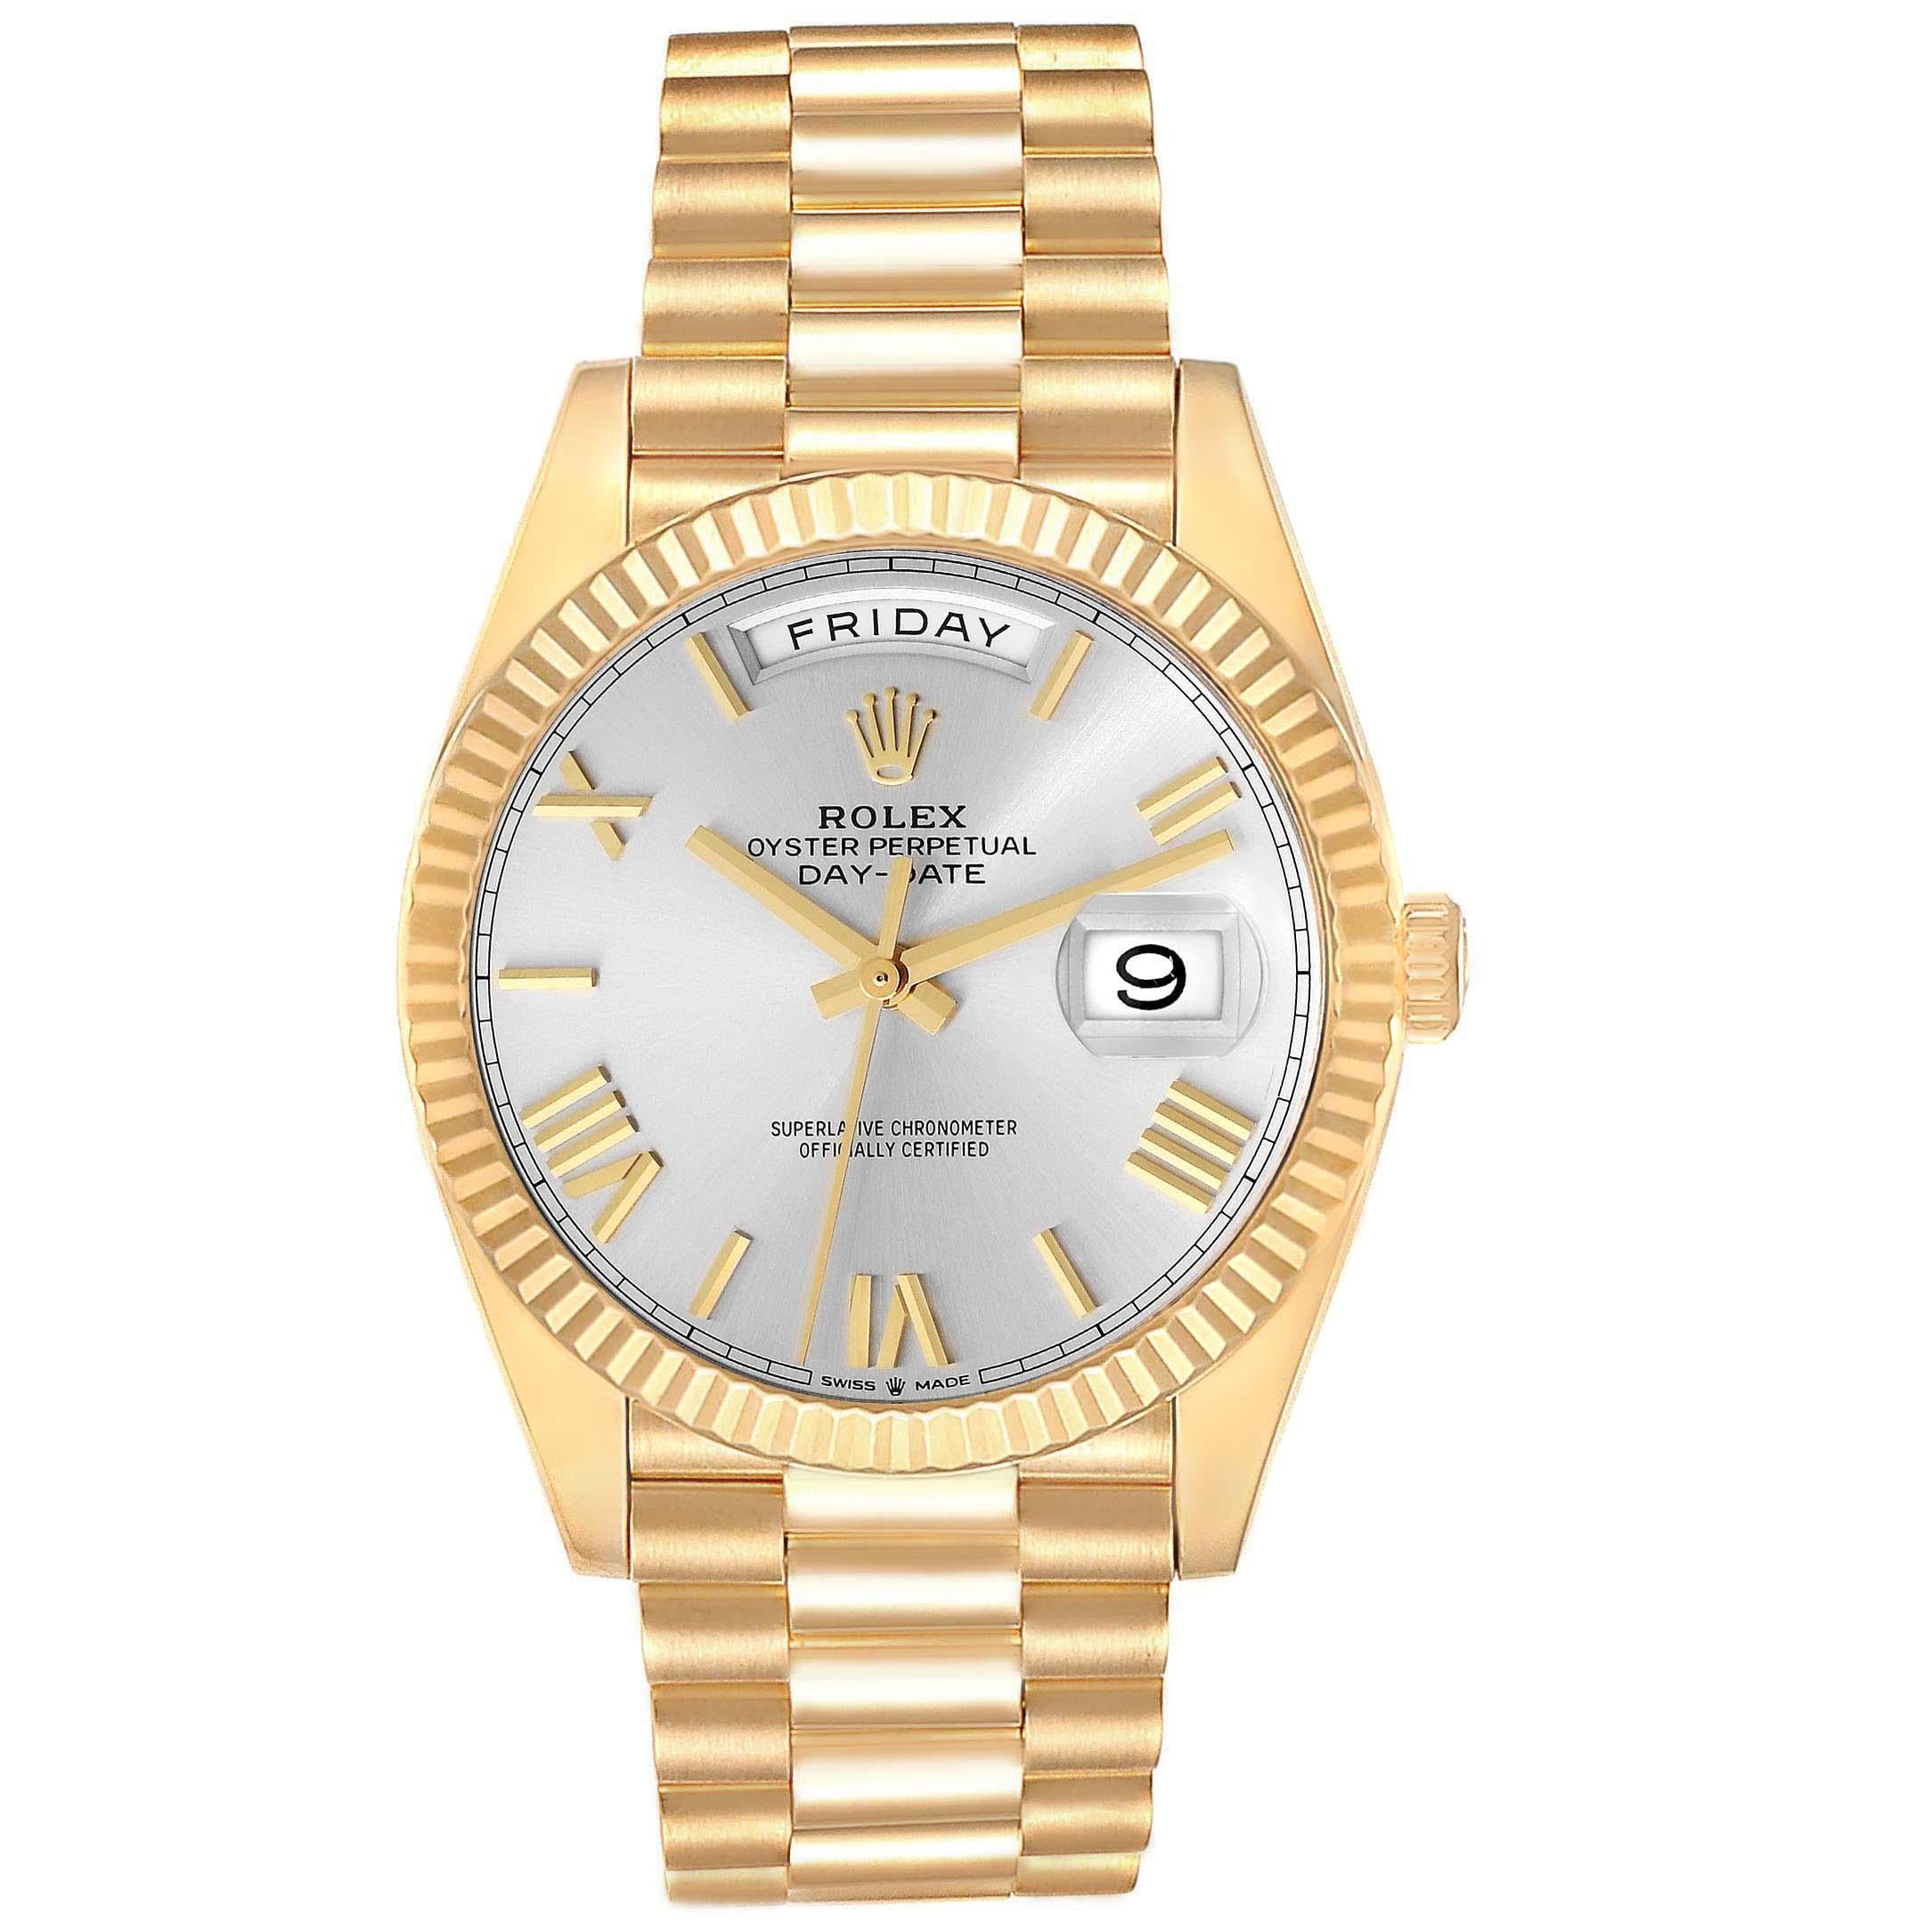 Rolex President Day Date 40 Yellow Gold Silver Dial Mens Watch 228238 Card. Officially certified chronometer automatic self-winding movement. Double quick set function. 18k yellow gold oyster case 40.0 mm in diameter.  Rolex logo on the crown. 18K